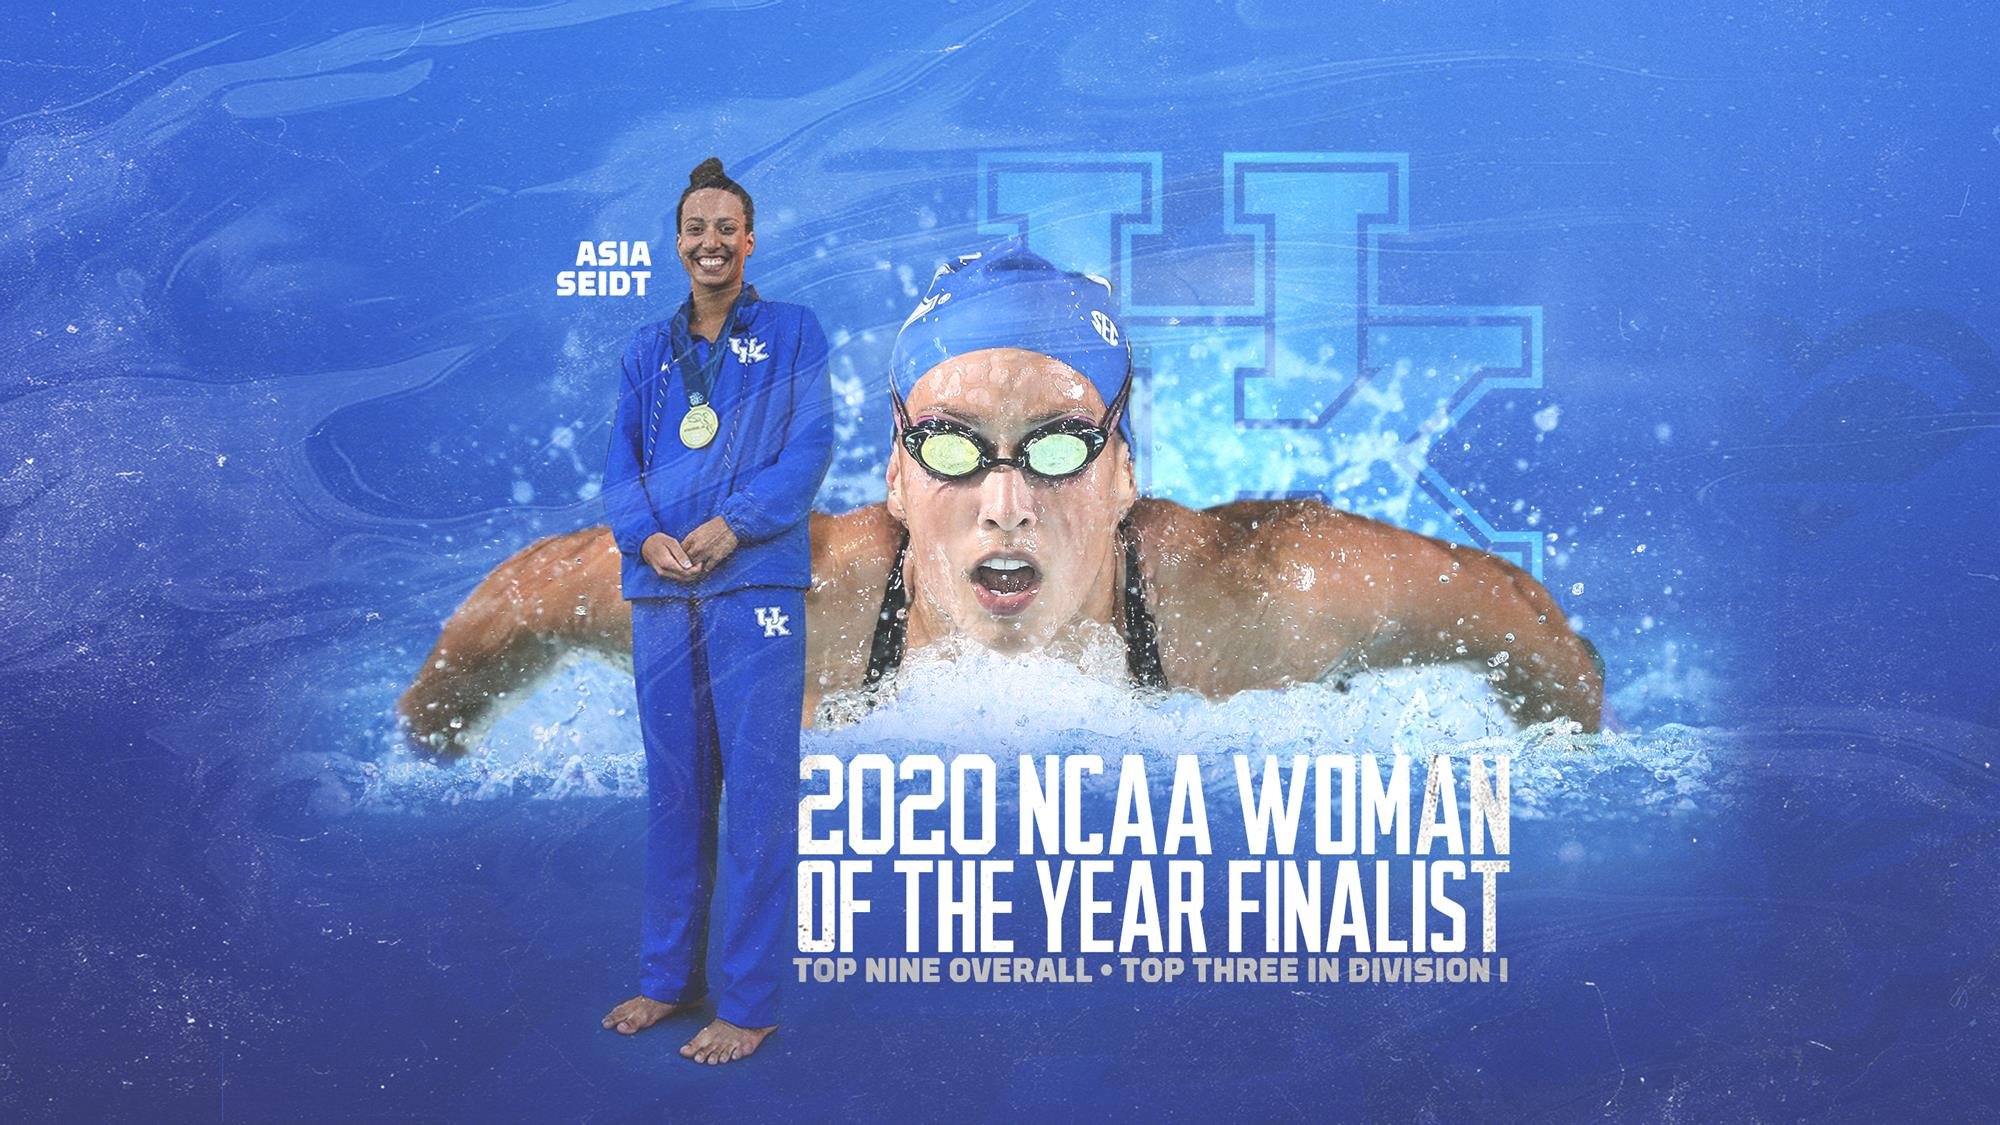 Asia Seidt Named 2020 NCAA Woman of the Year Finalist